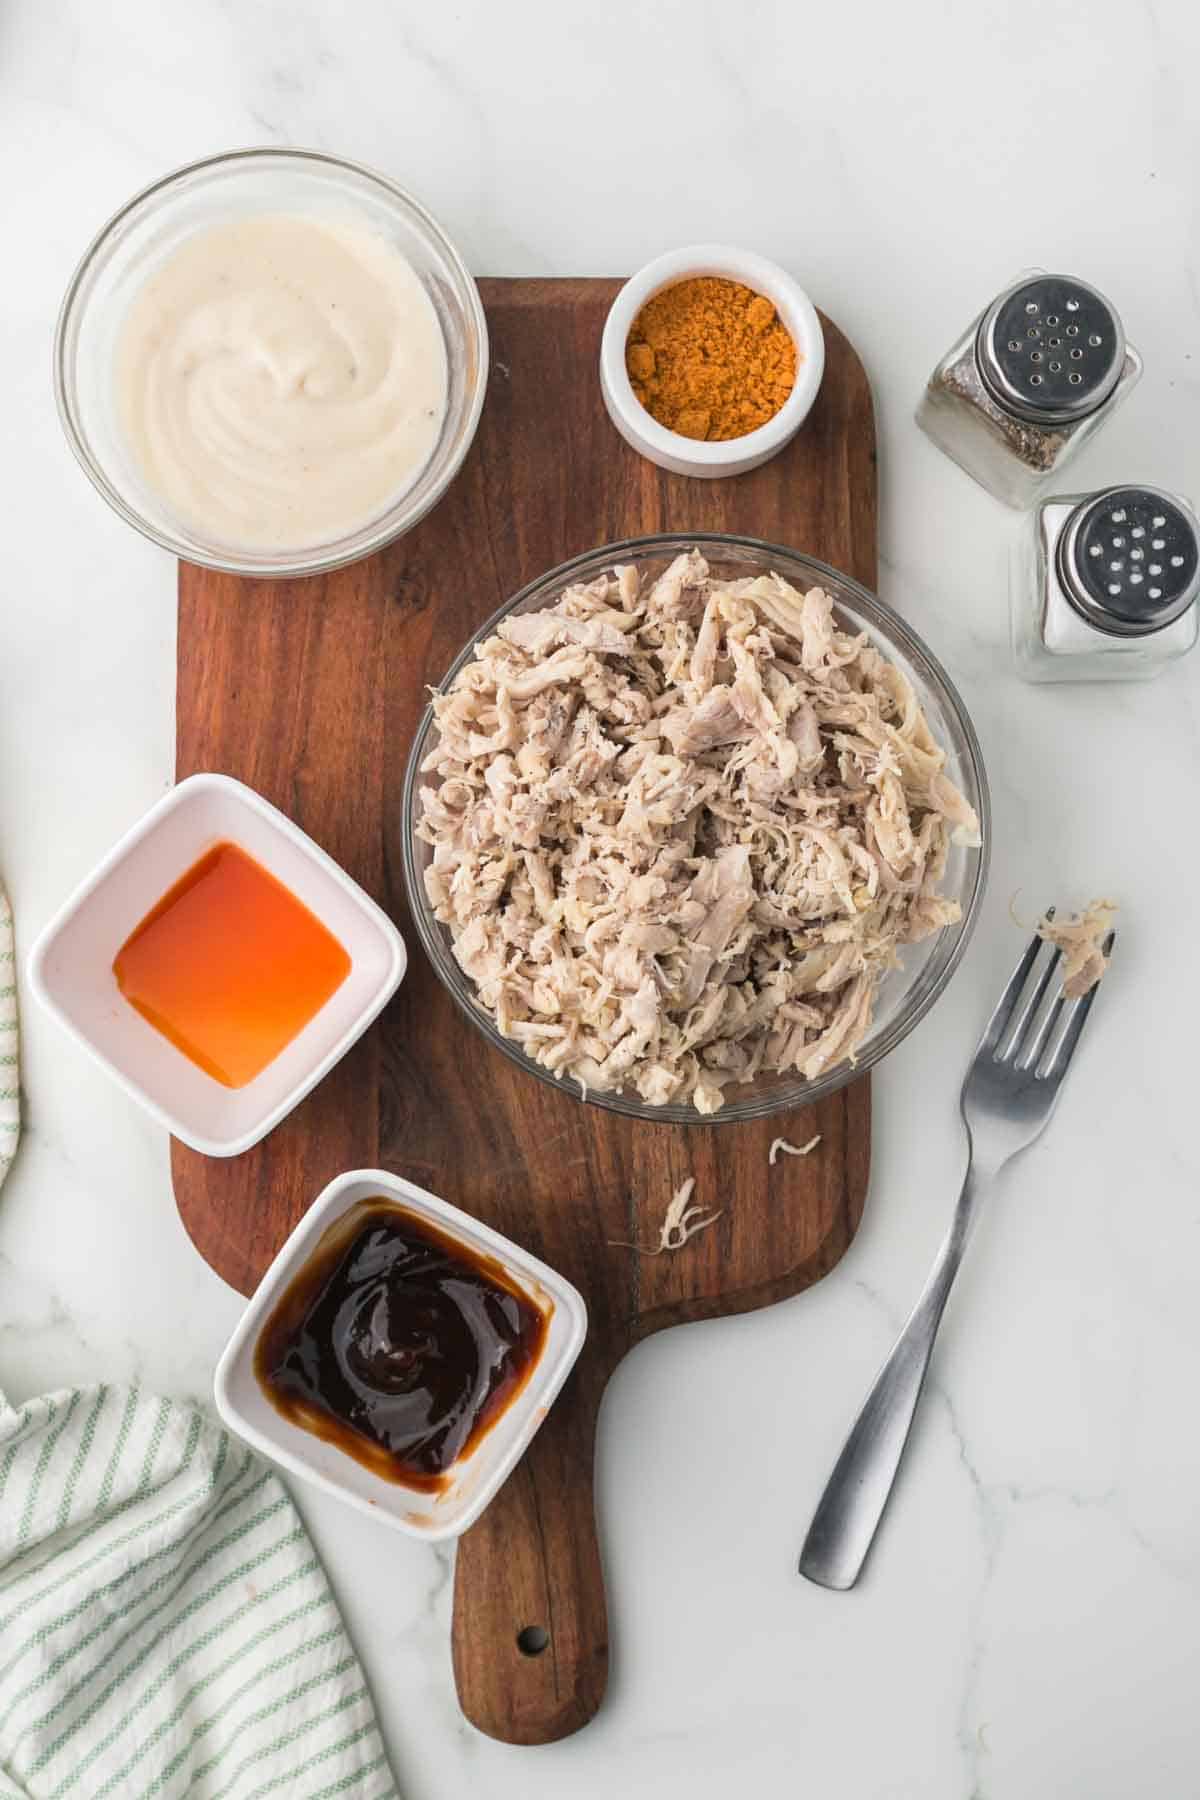 top view of shredded chicken in a clear bowl with seasonings and sauces around it